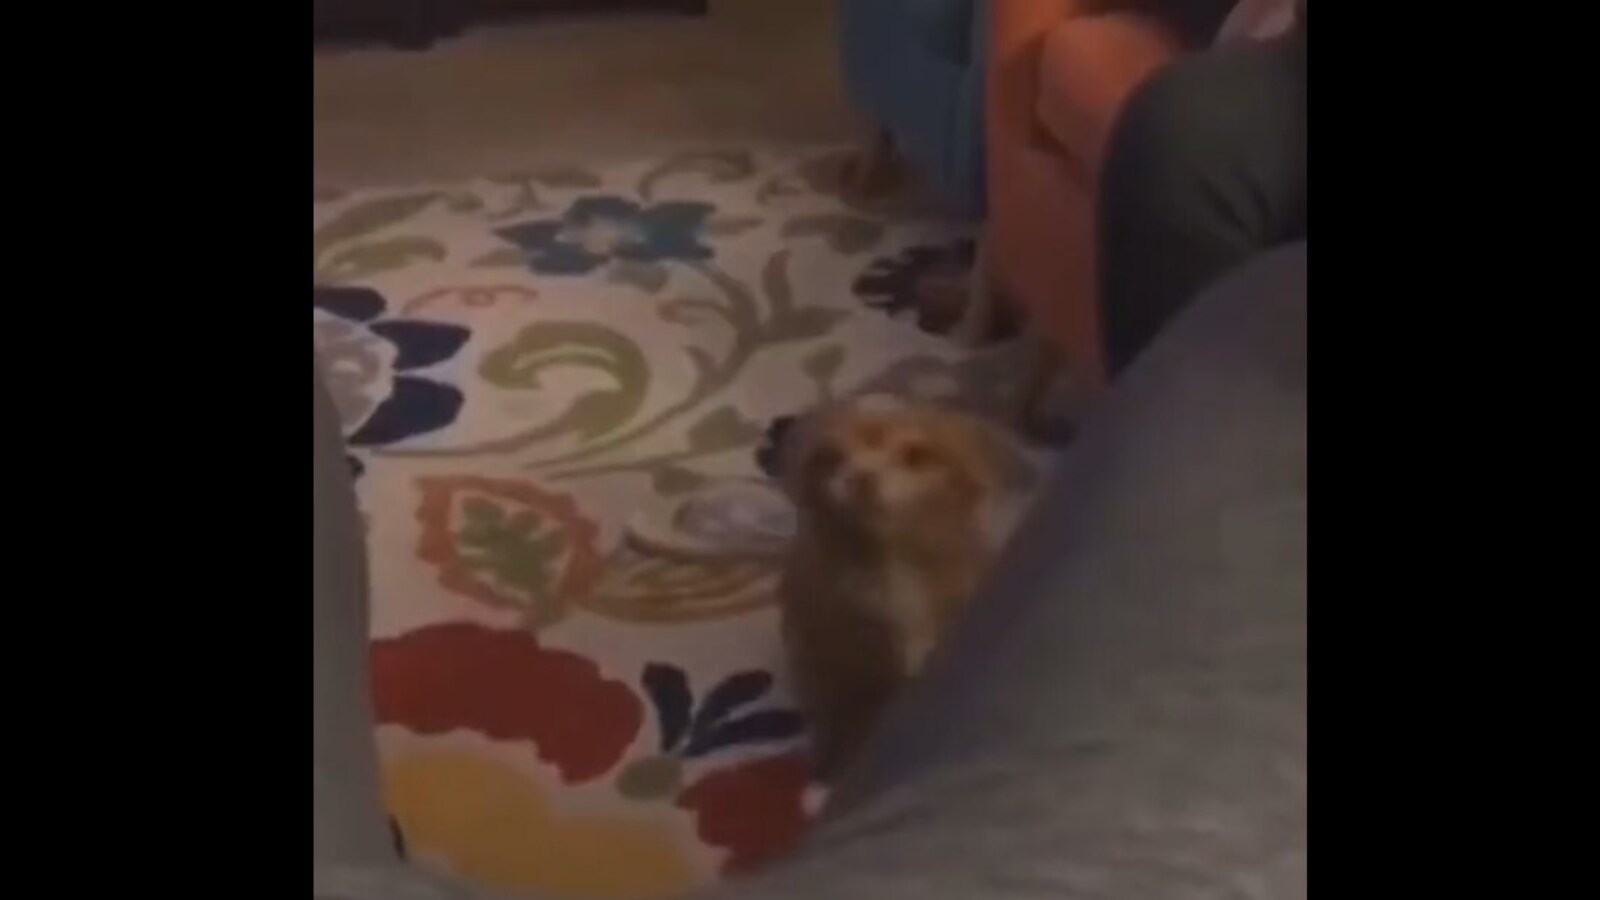 Pup plays hide and seek with its human. Watch funny video | Trending -  Hindustan Times